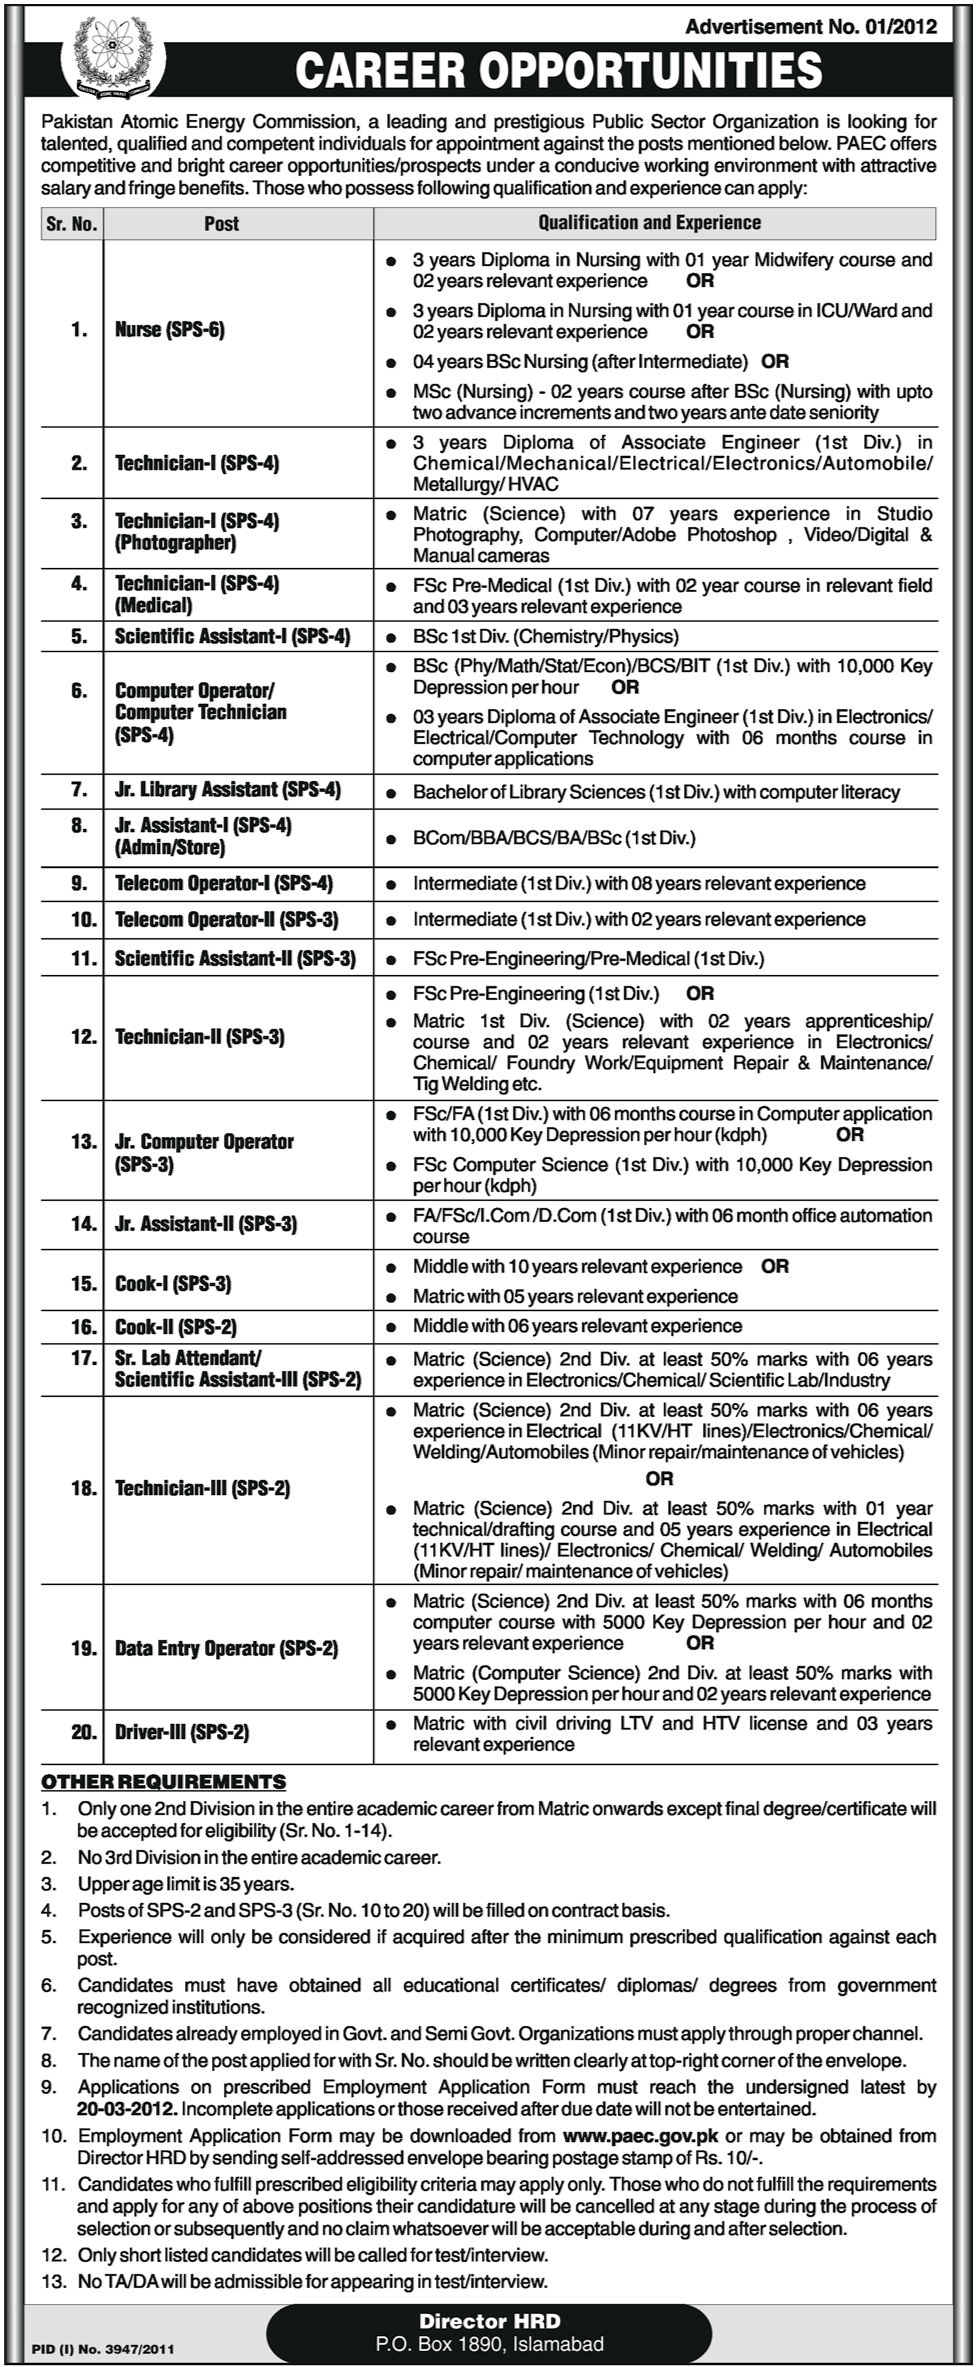 Pakistan Atomic Energy Commission Jobs Opportunity